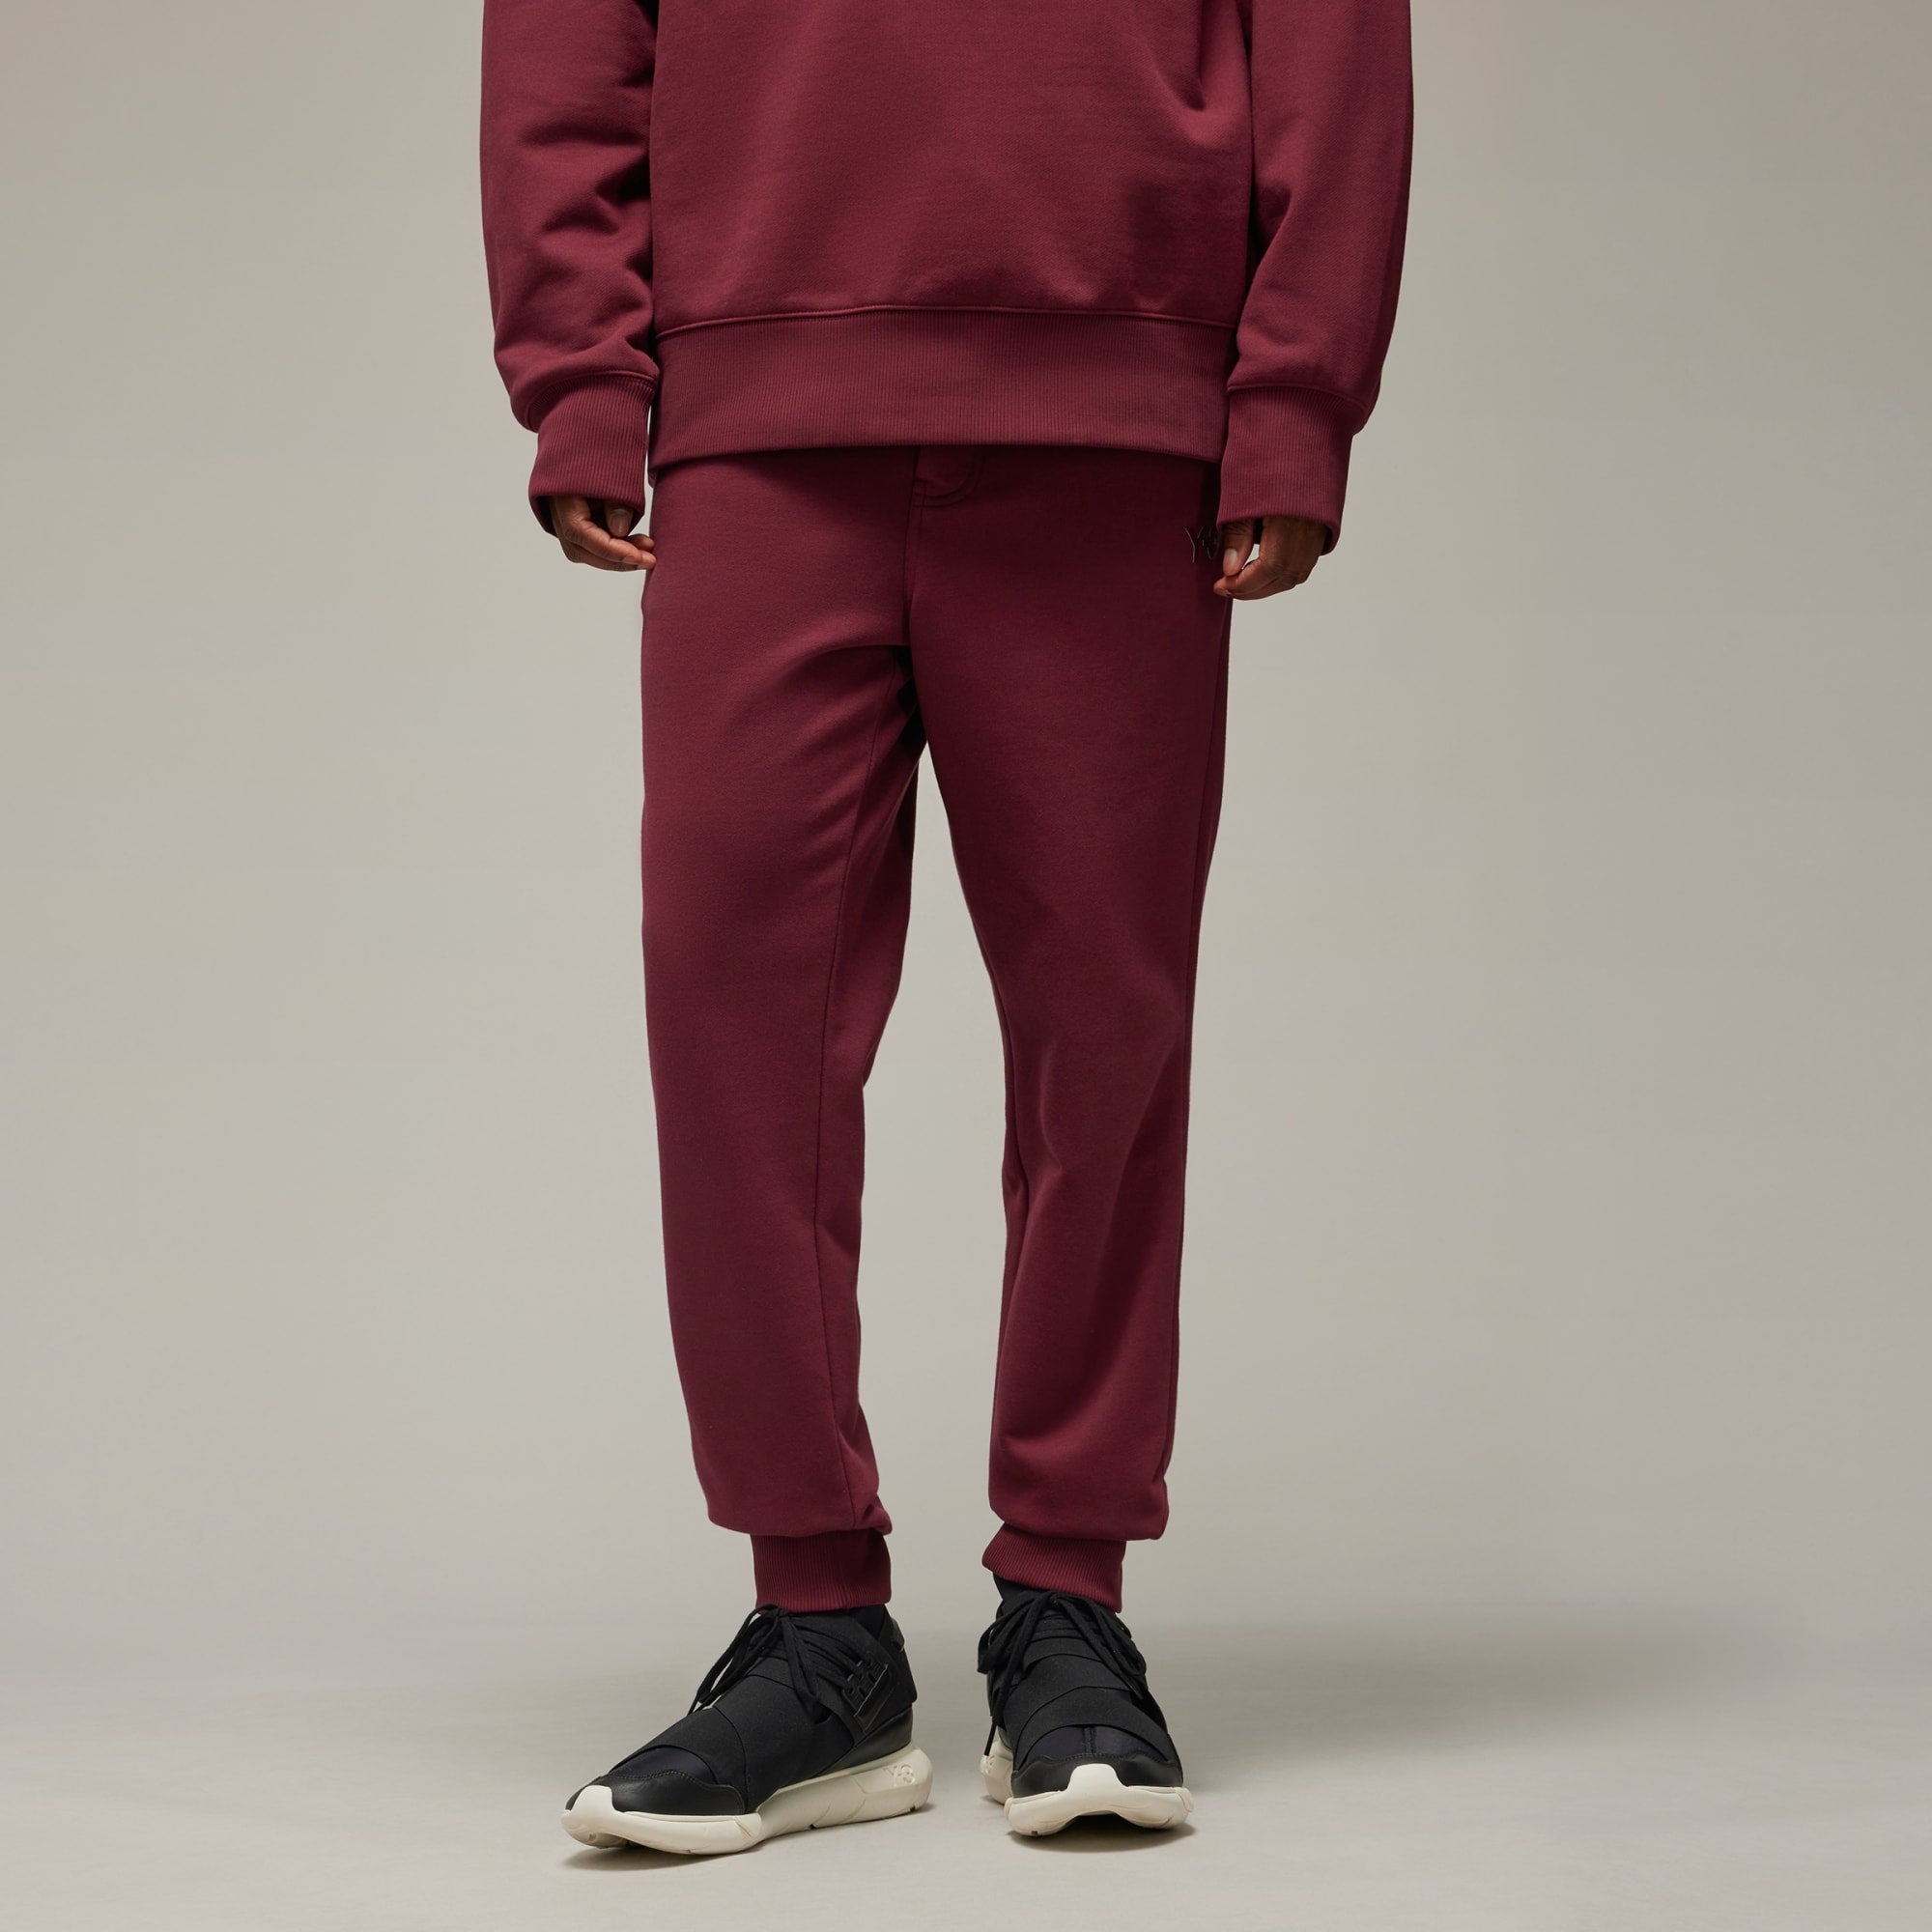 Y-3 FRENCH TERRY CUFFED PANTS – Hombre Amsterdam